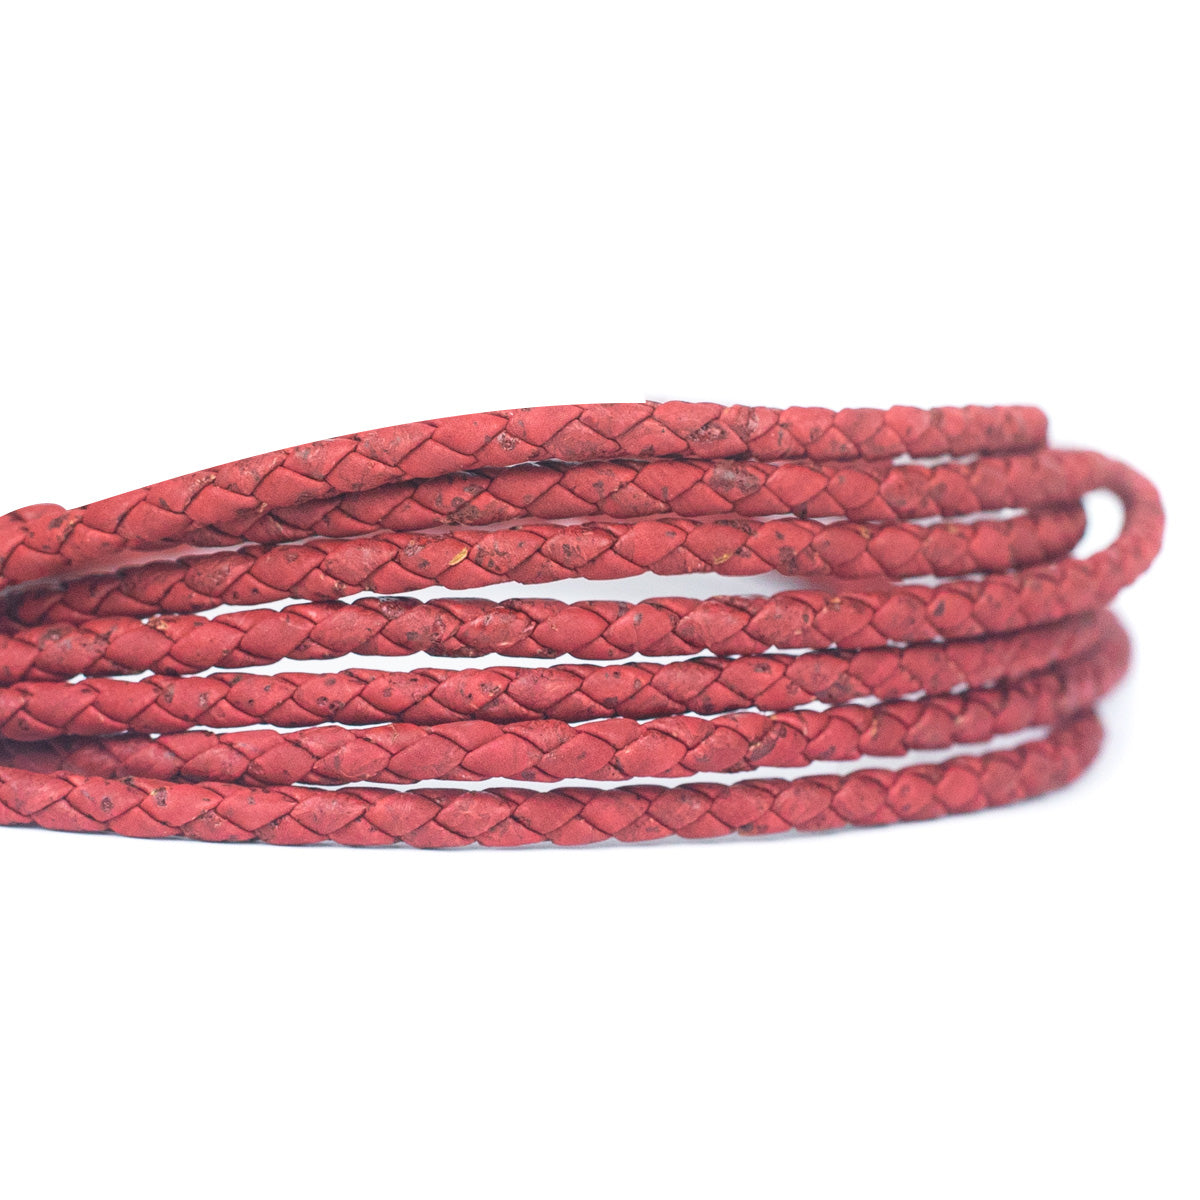 10 meters of 5mm Wine Red Braided Cork Jewelry Crafting Cord COR-328